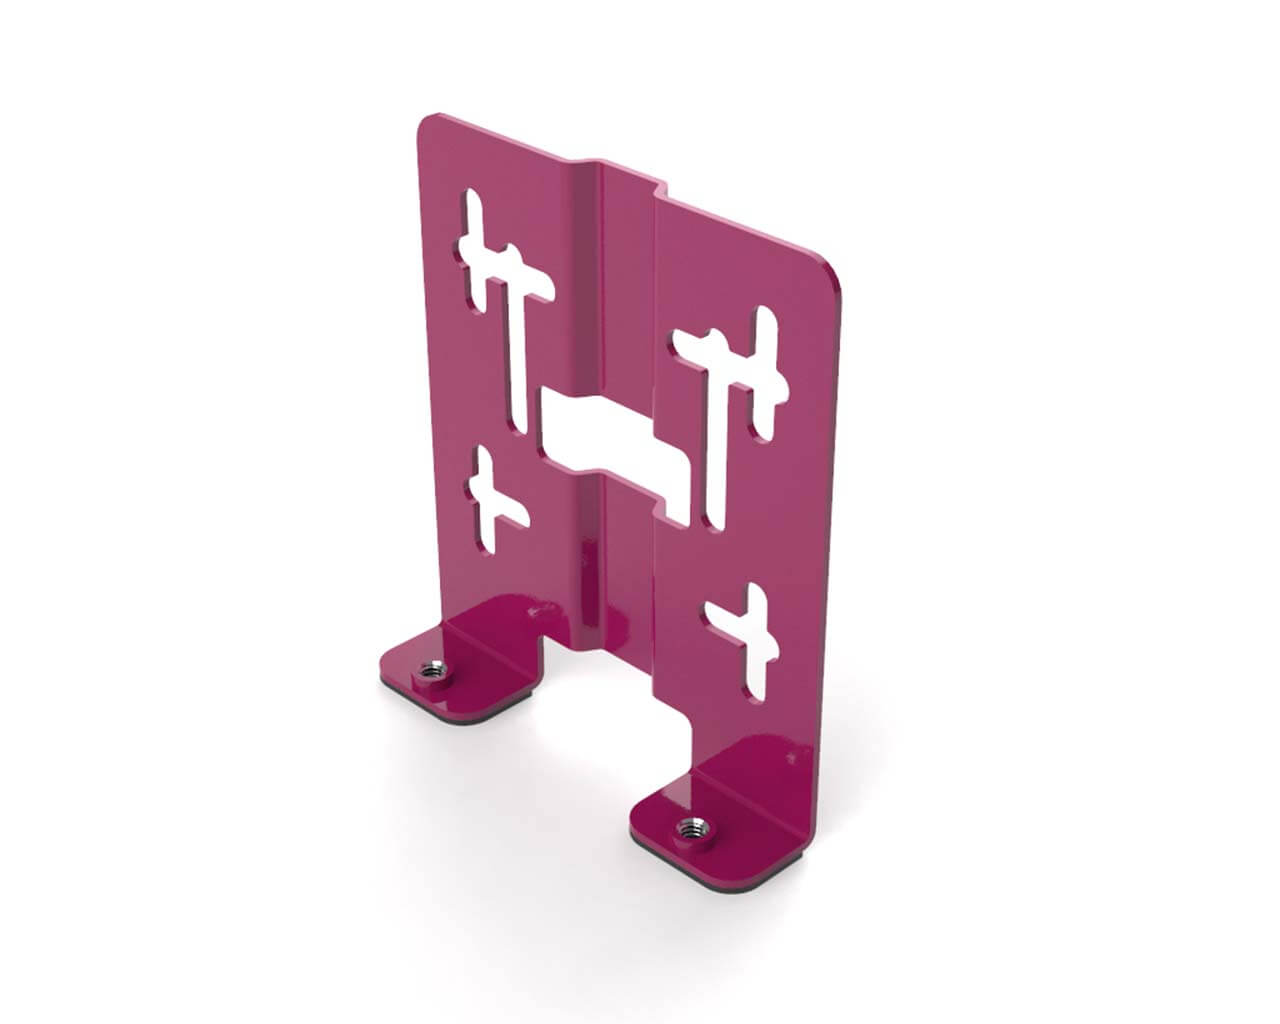 PrimoChill SX Universal Res/Pump Mount Bracket - PrimoChill - KEEPING IT COOL Magenta